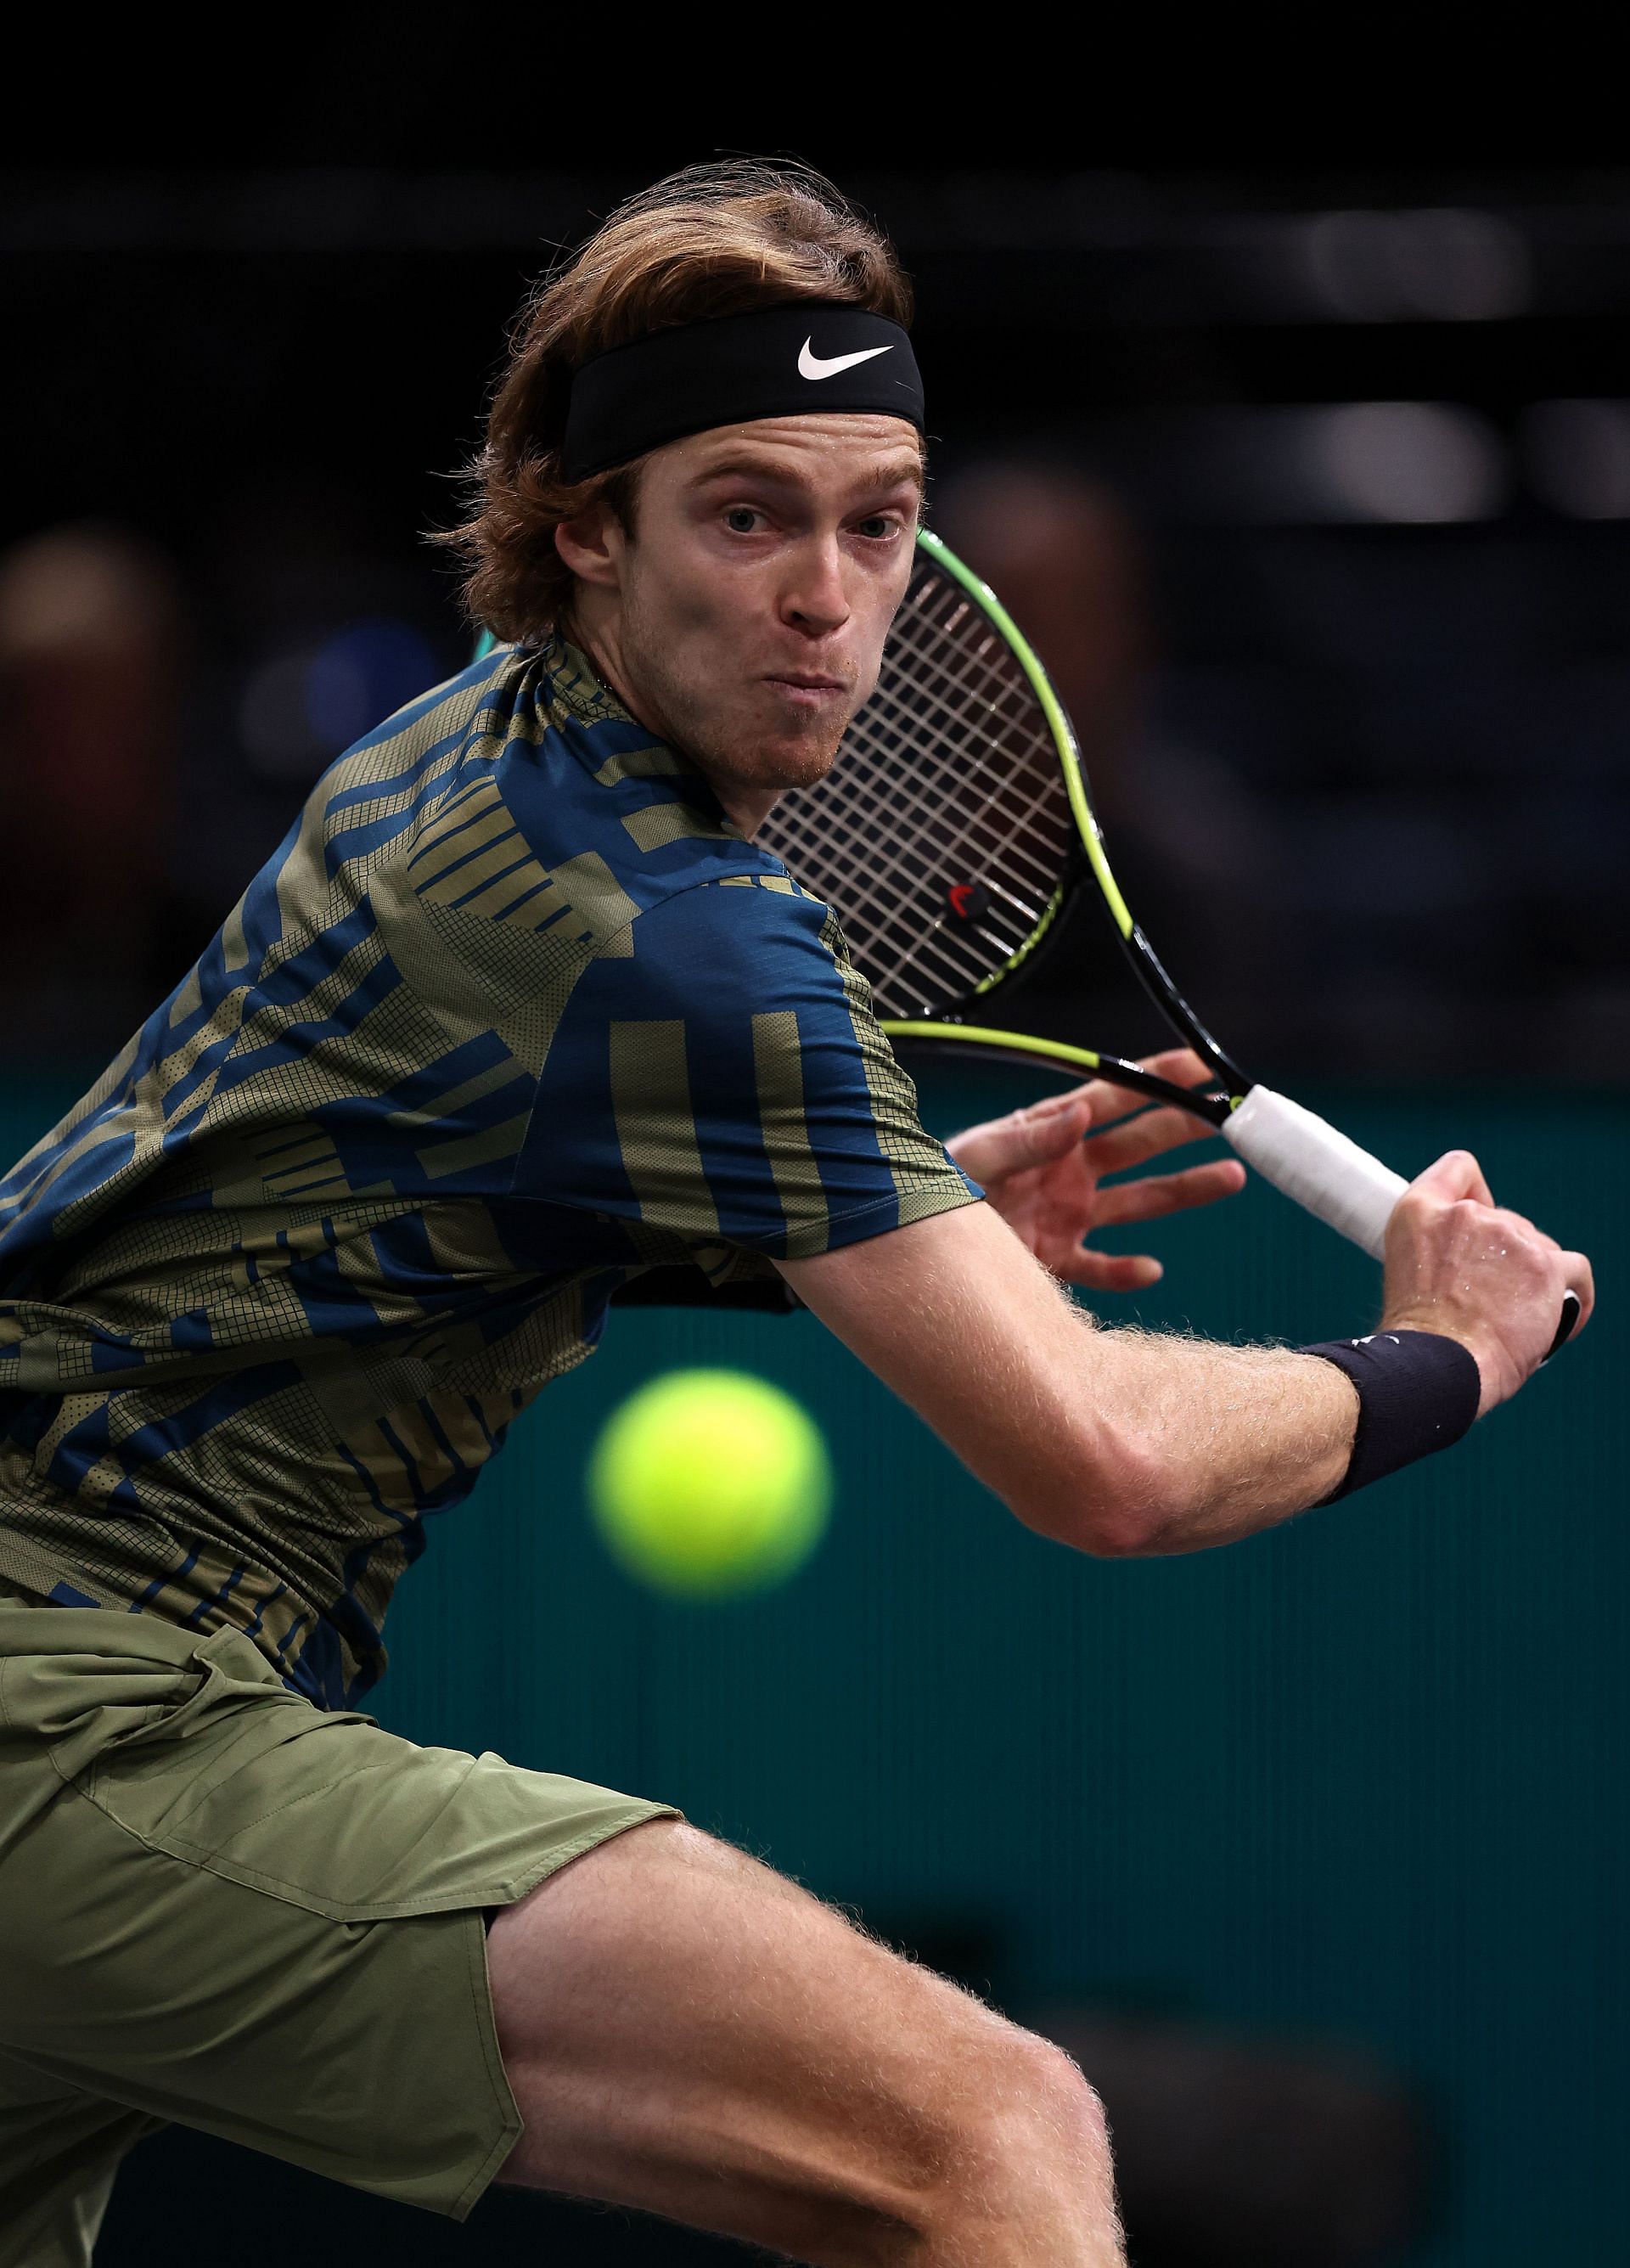 Andrey Rublev in action at the Rolex Paris Masters